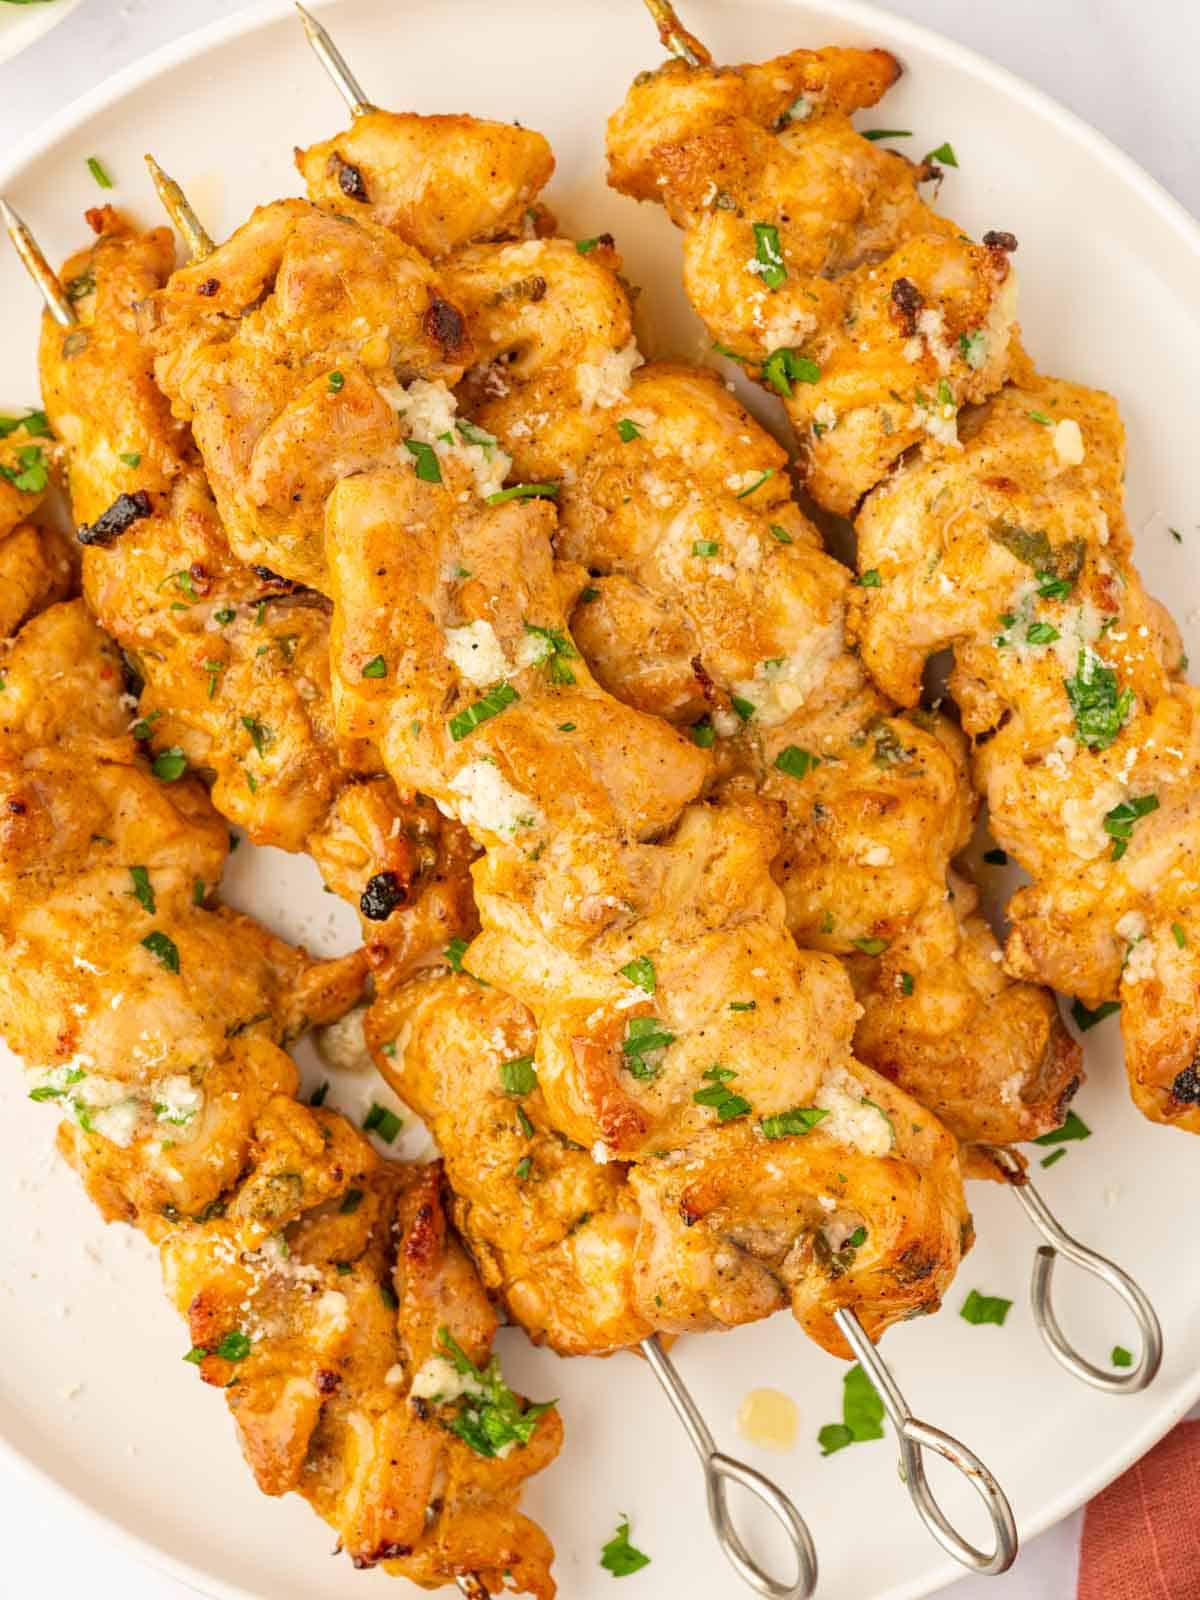 Oven chicken skewers on plate.